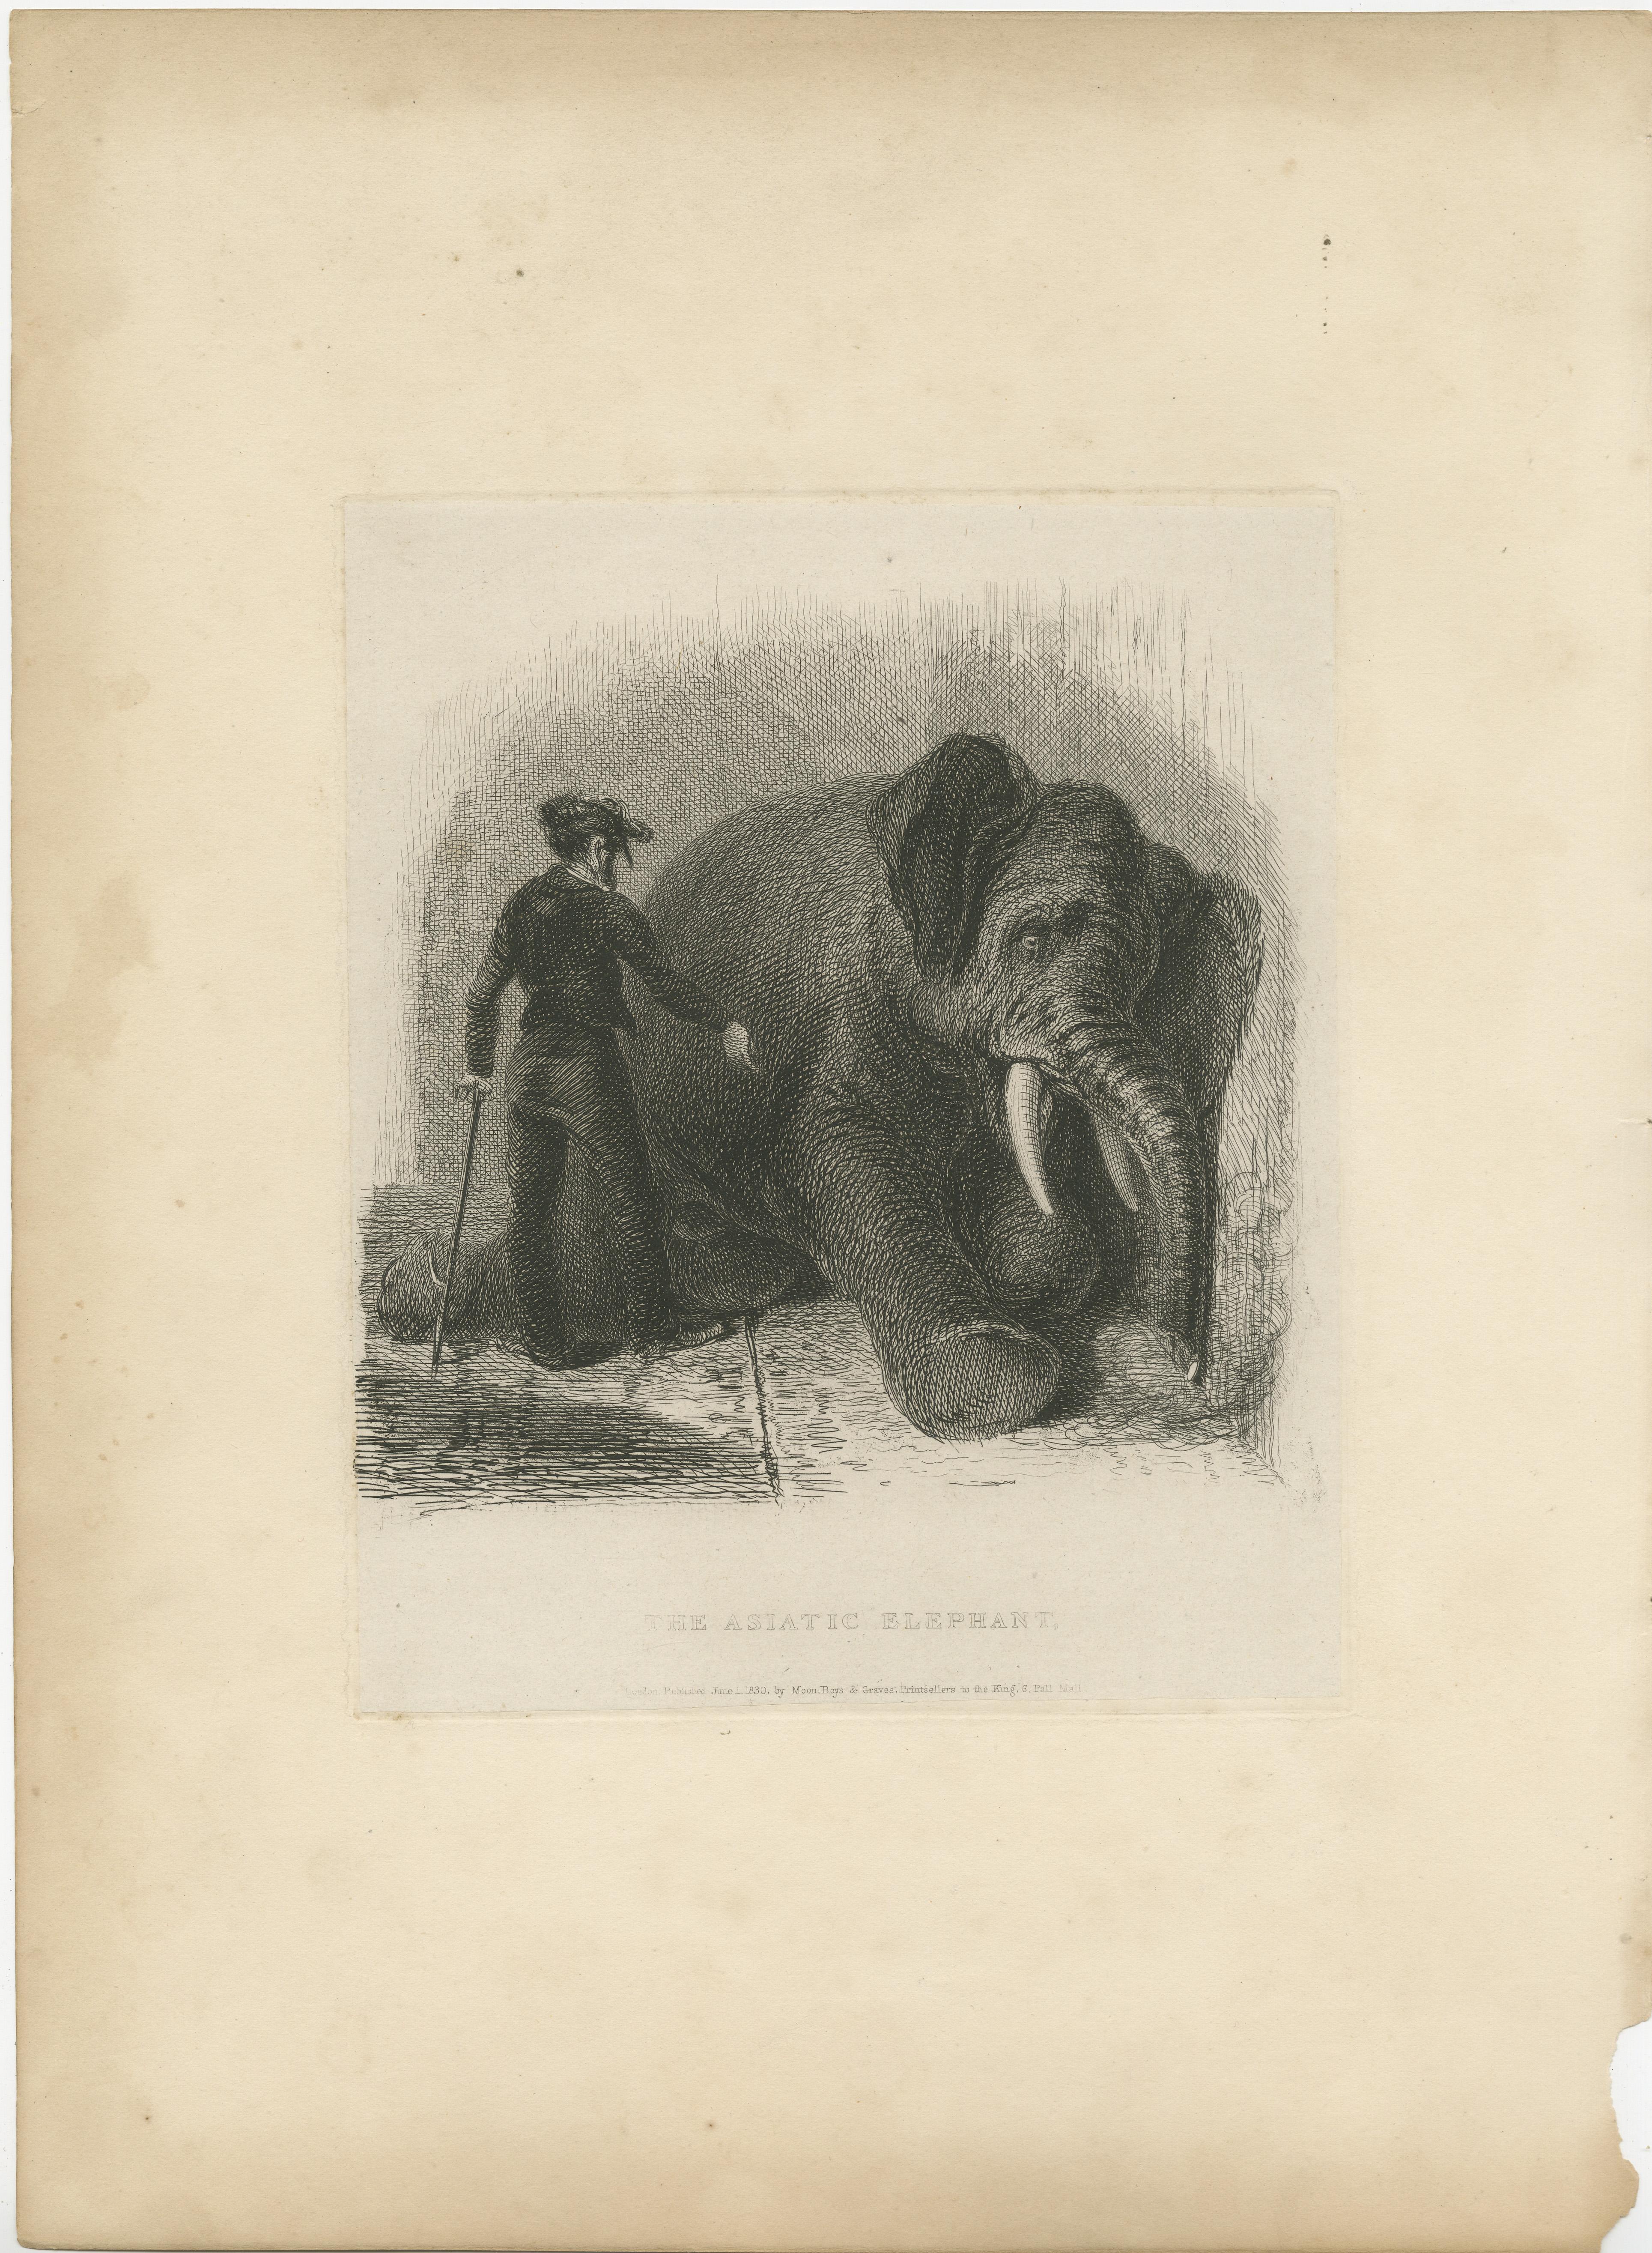 Antique print titled 'The Asiatic Elephant'. Original old print of an Asian elephant. This print originates from the series 'Characteristic sketches of animals, principally from the Zoological Gardens, Regent's Park' published circa 1832 by John